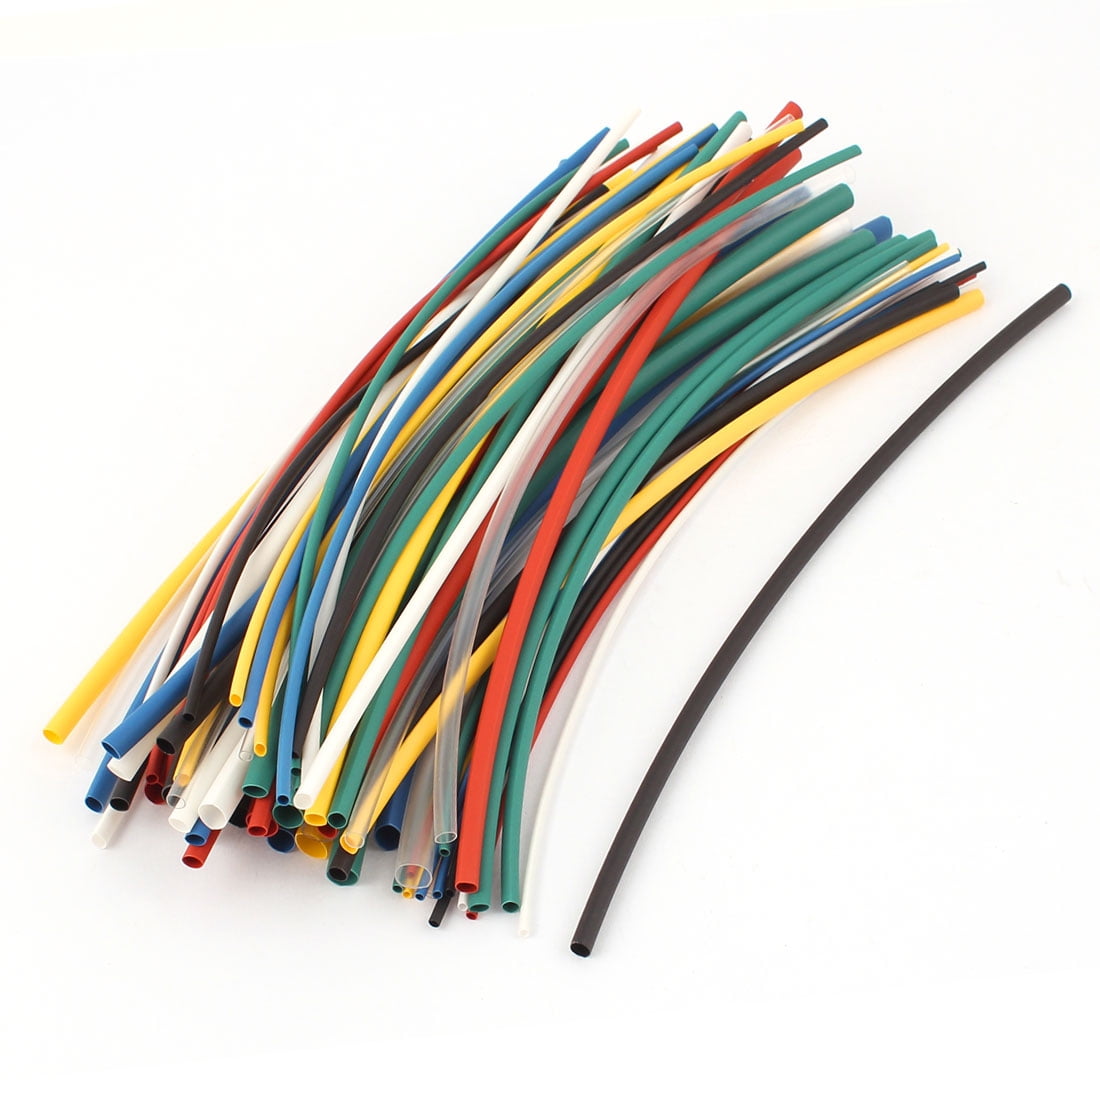 Details about   530x Assortment 2:1 Heat Shrink Wire Wrap Tubing Electrical Connection Cable Set